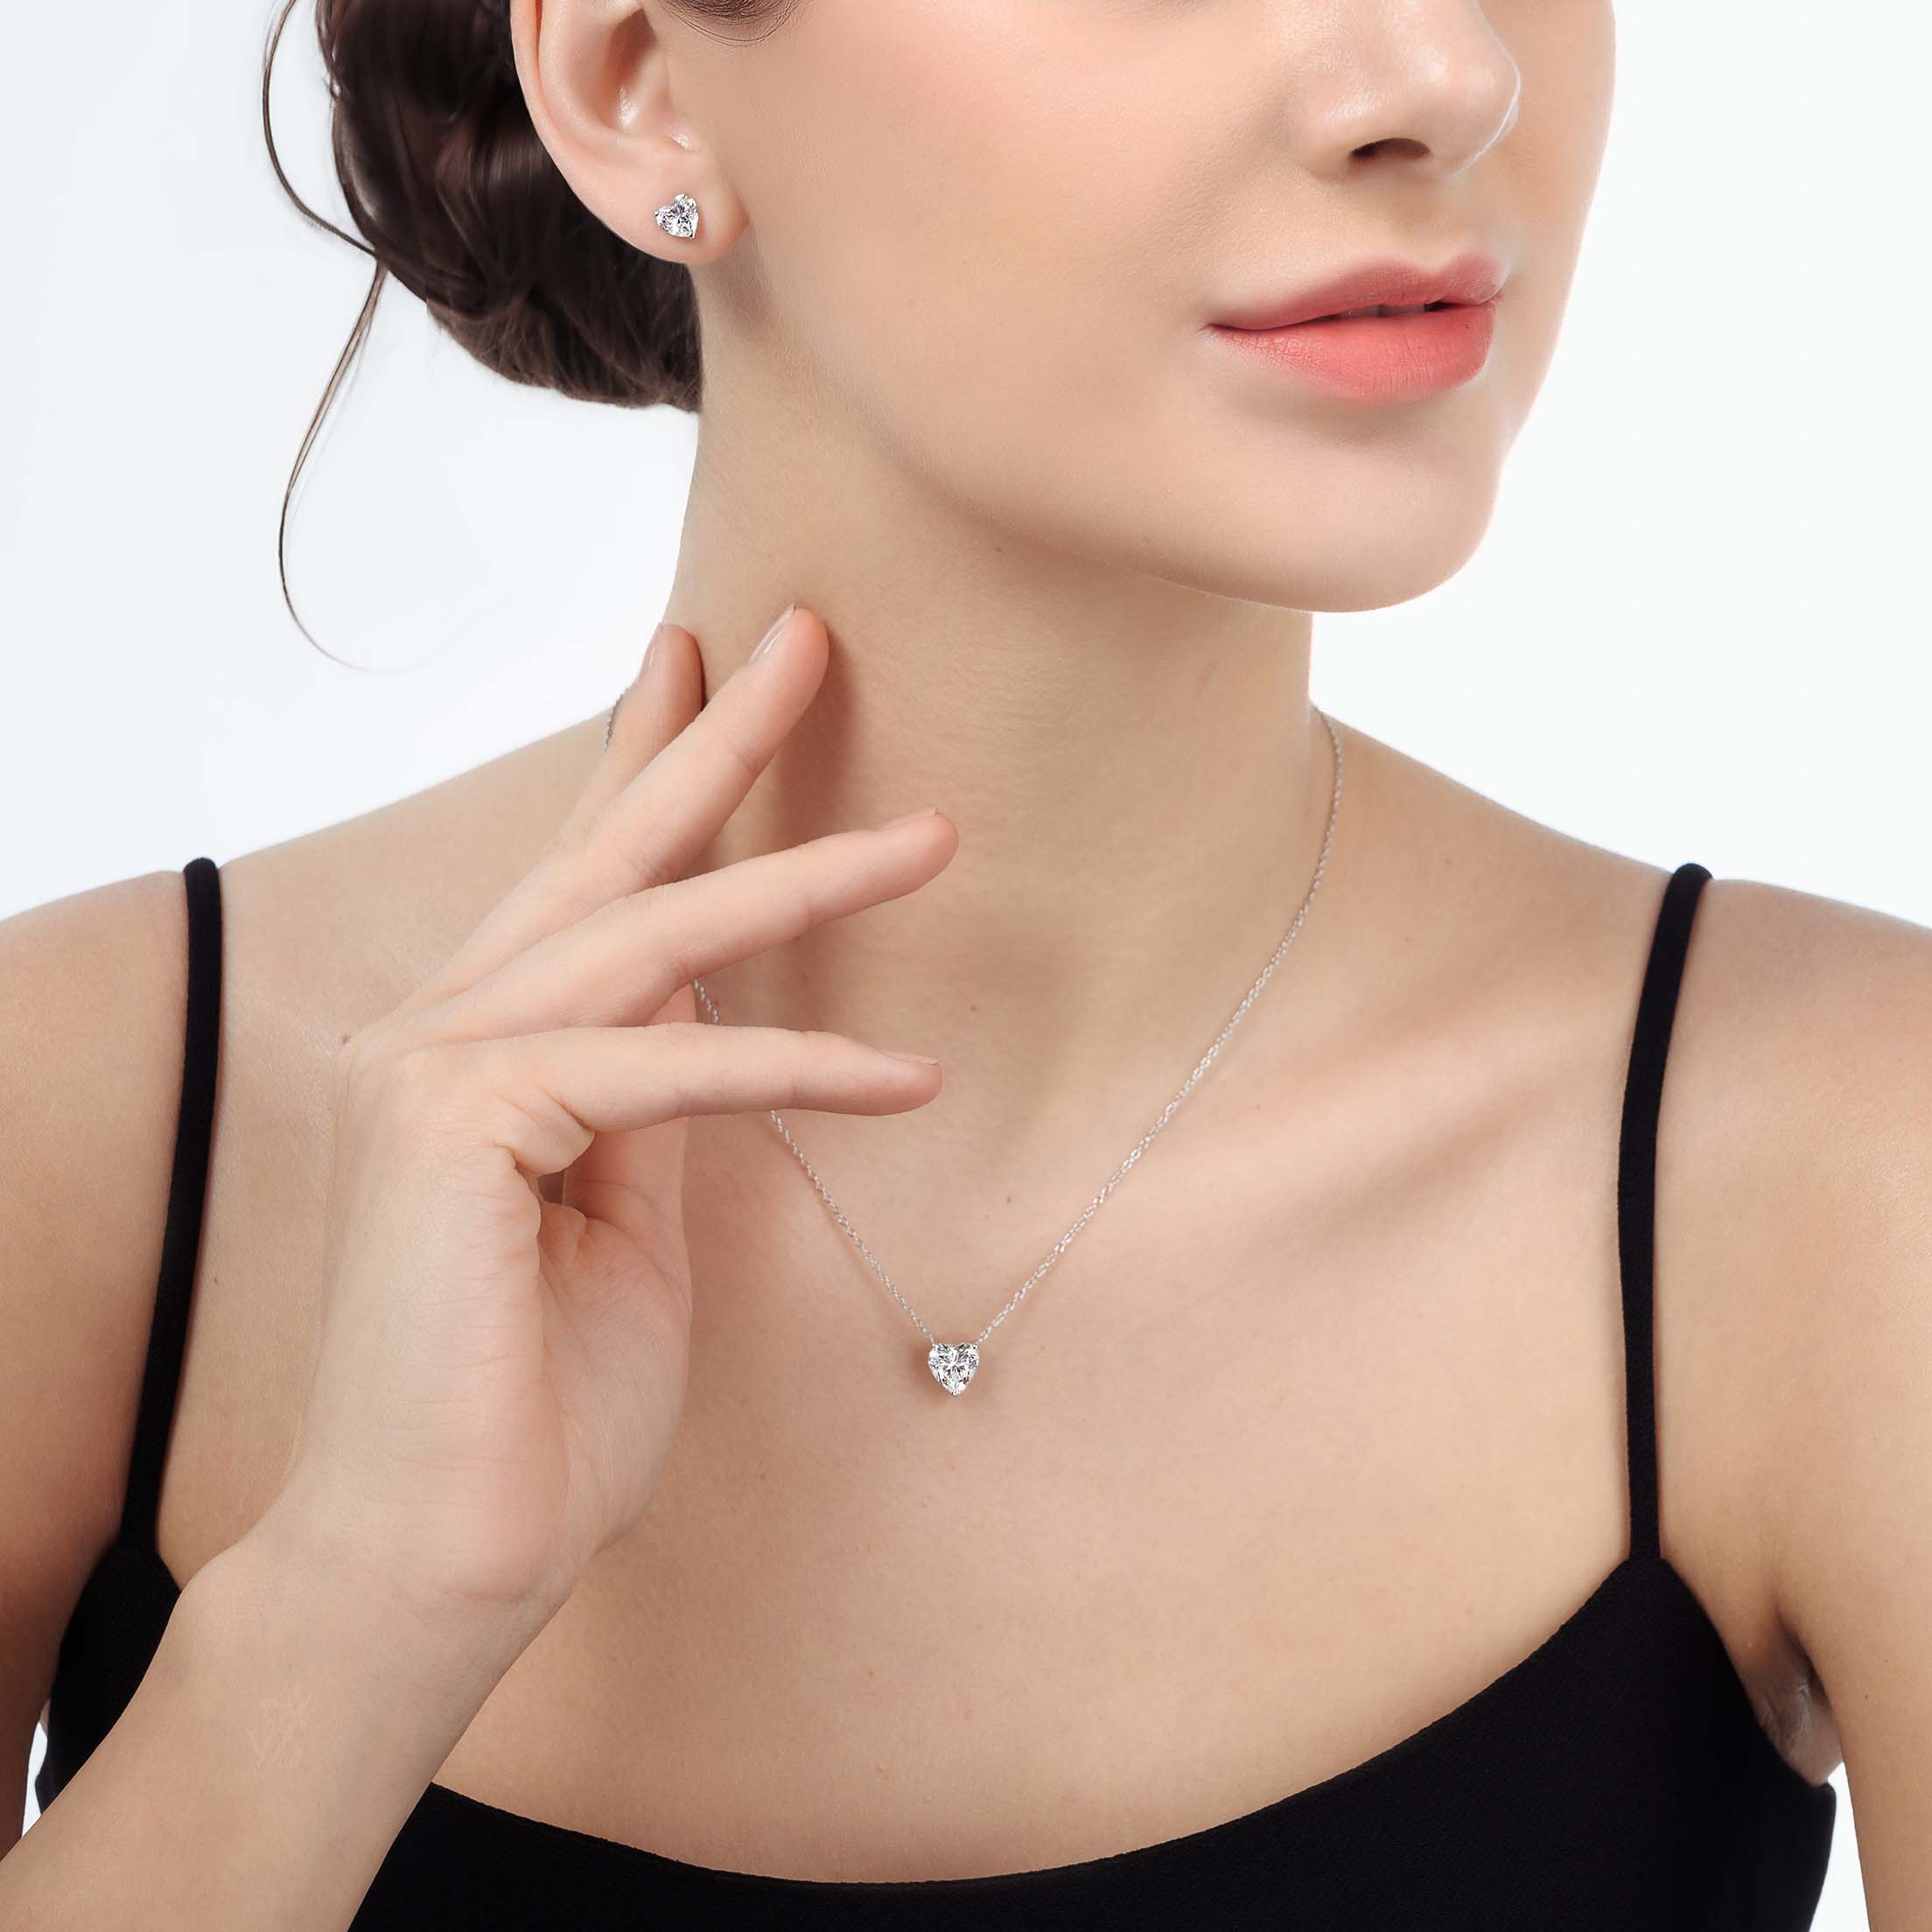 Heart Solitaire Necklace (Model) - Eclat hy Oui